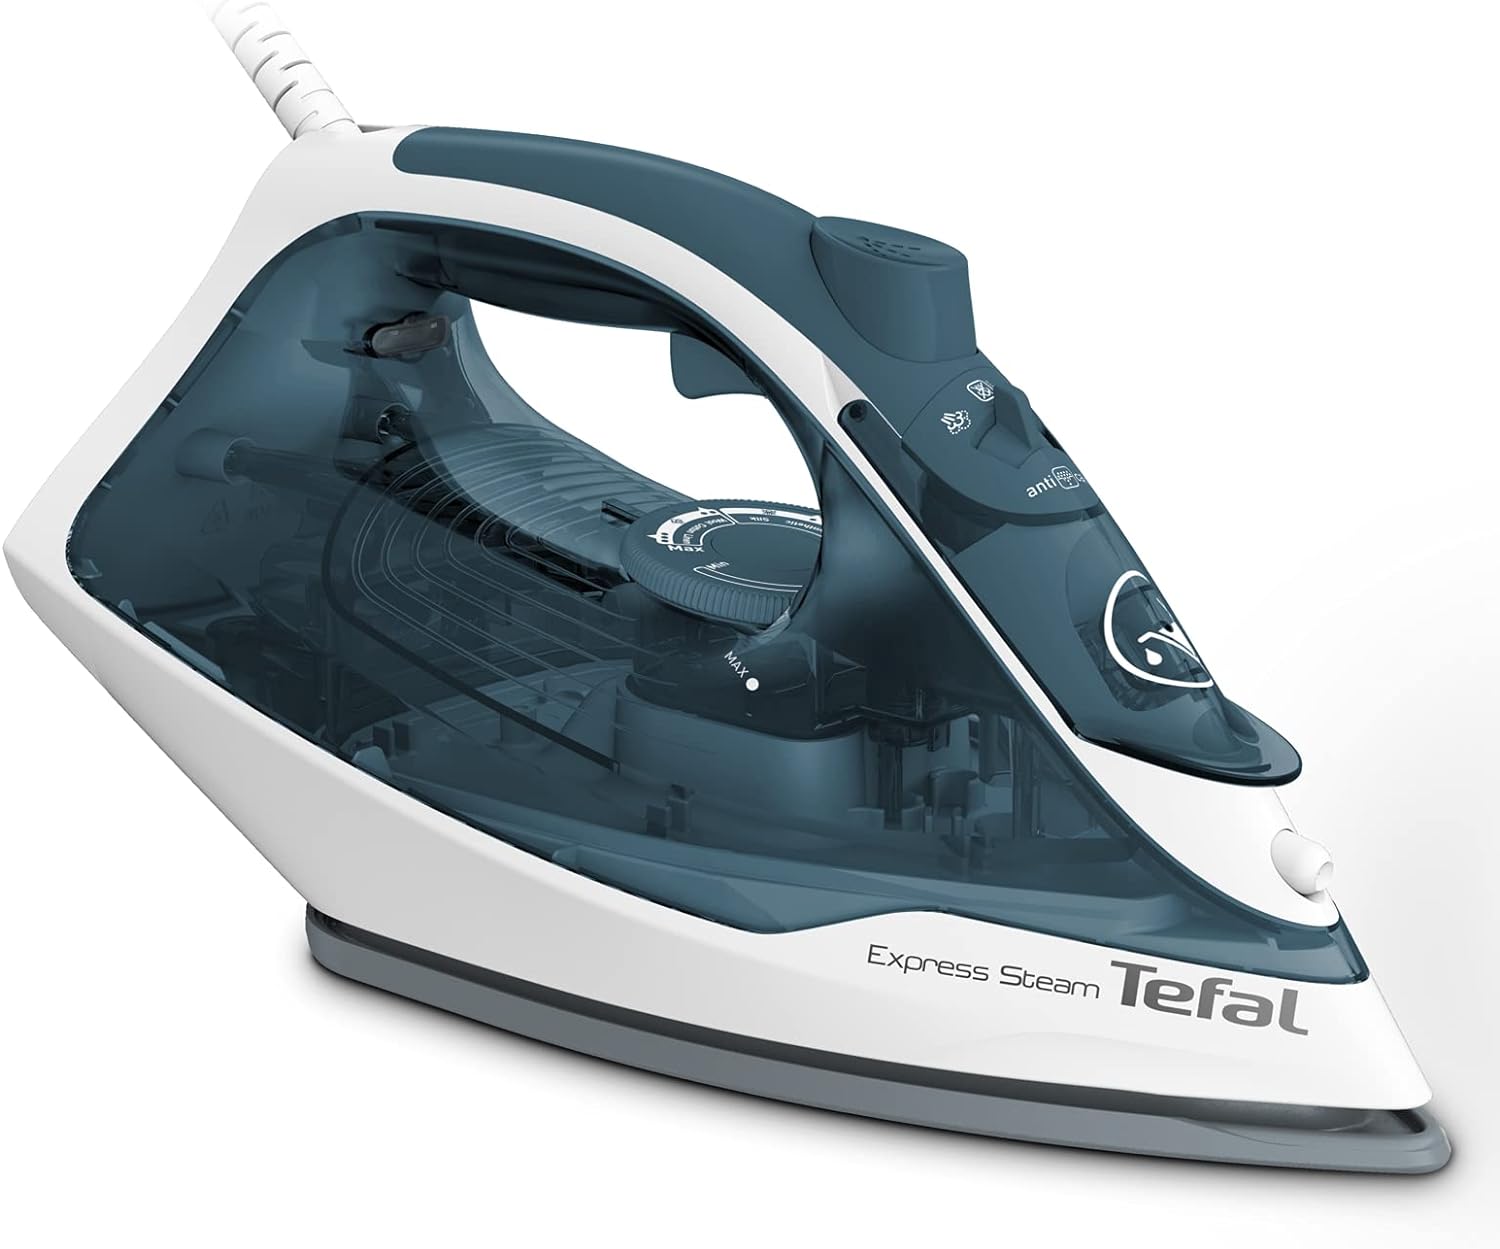 Tefal steam iron with continuous steam flow of 210 g/min with boost for thick fabrics - 2400 W capacity - 270 ml - 50/60 Hz - Express Steam FV2831M0